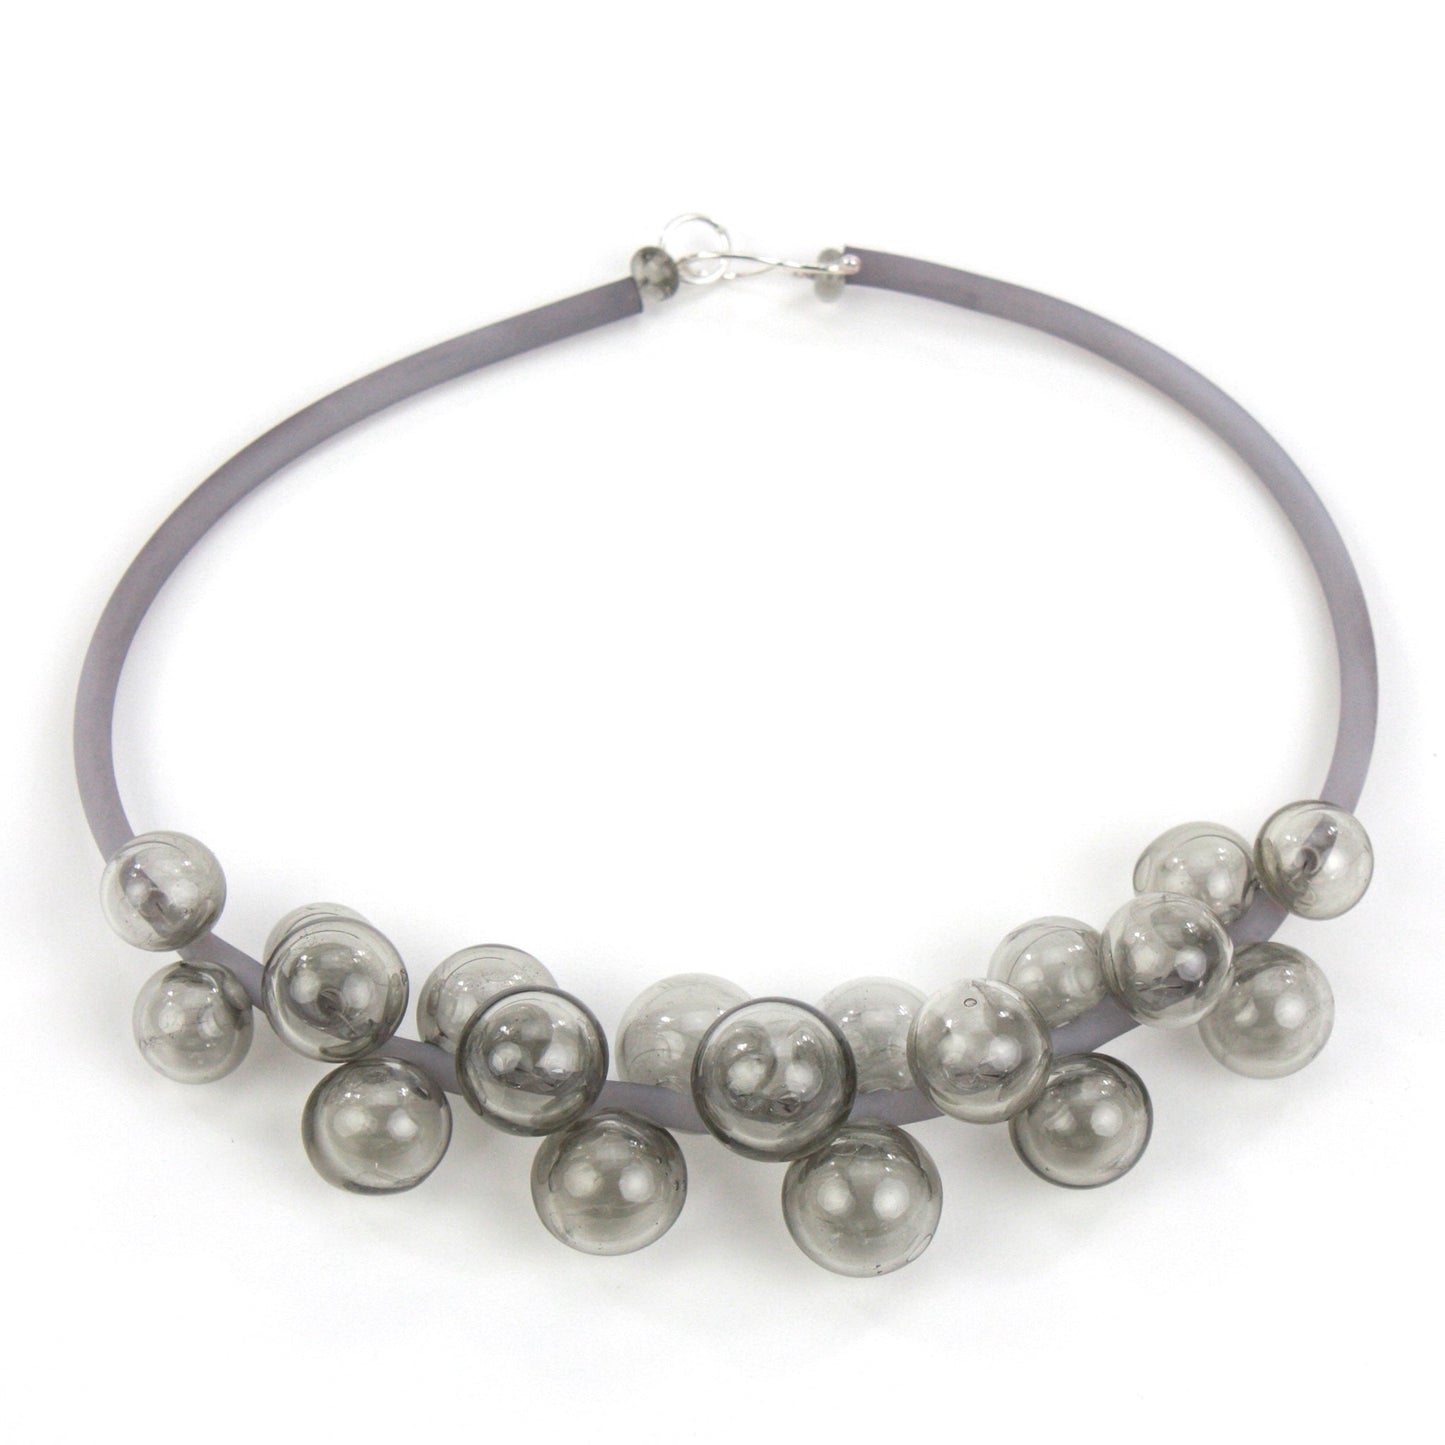 Chroma Bolla Necklace in Grey